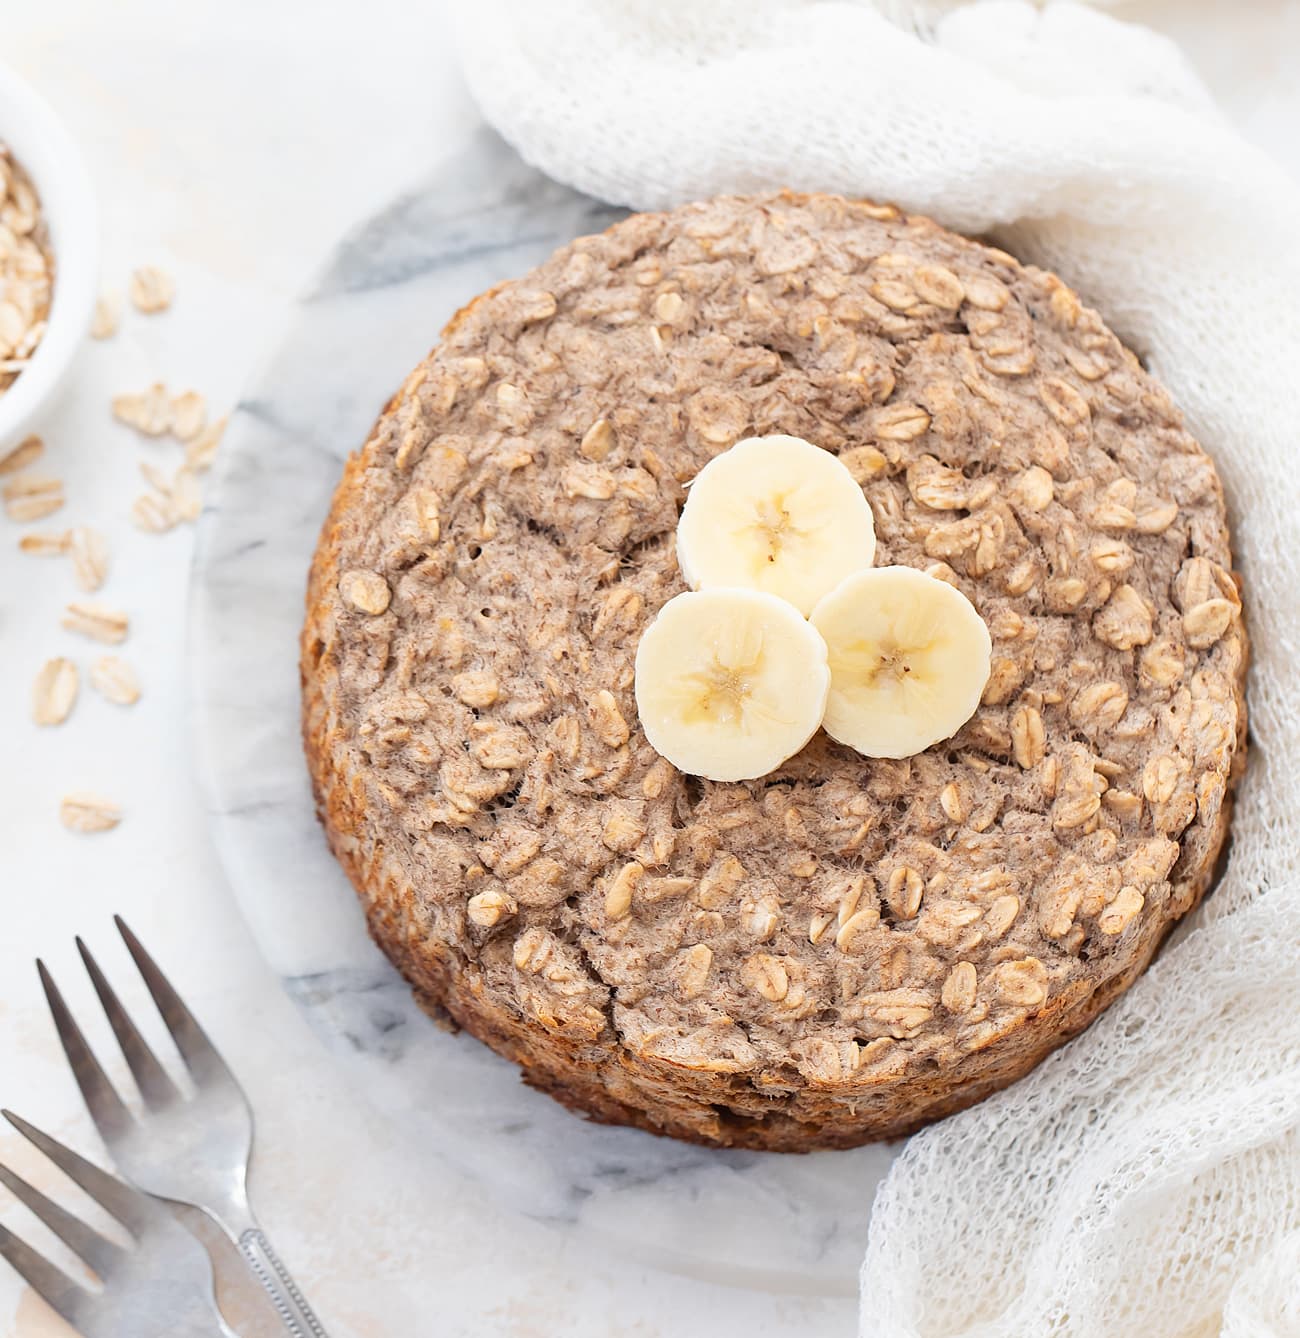 Microwave Vanilla Banana Oat Cake Recipe and Nutrition - Eat This Much